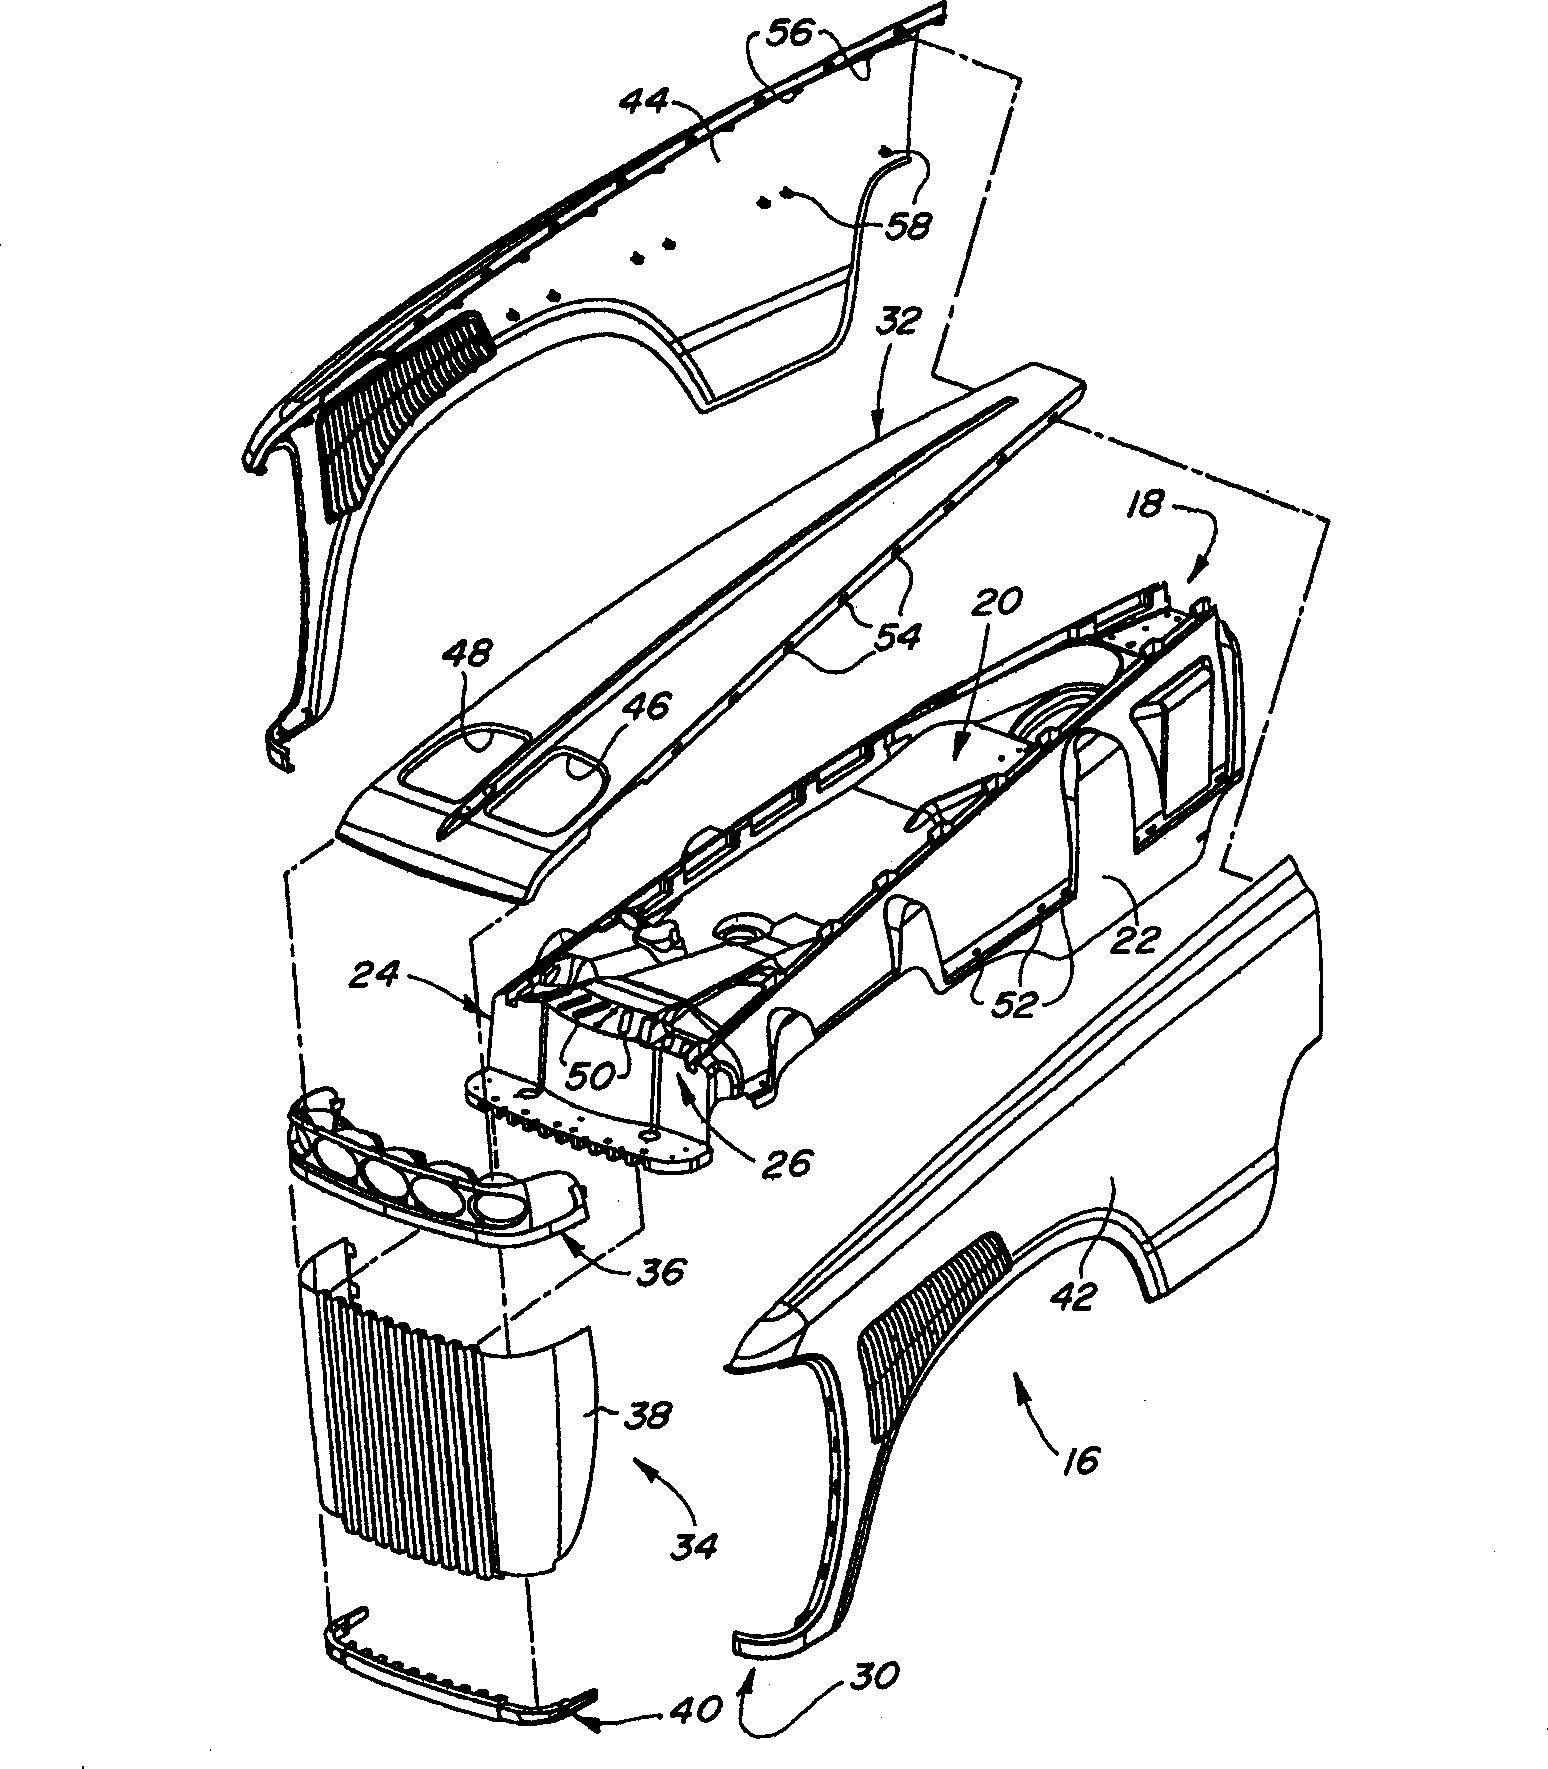 Engine casing assembly